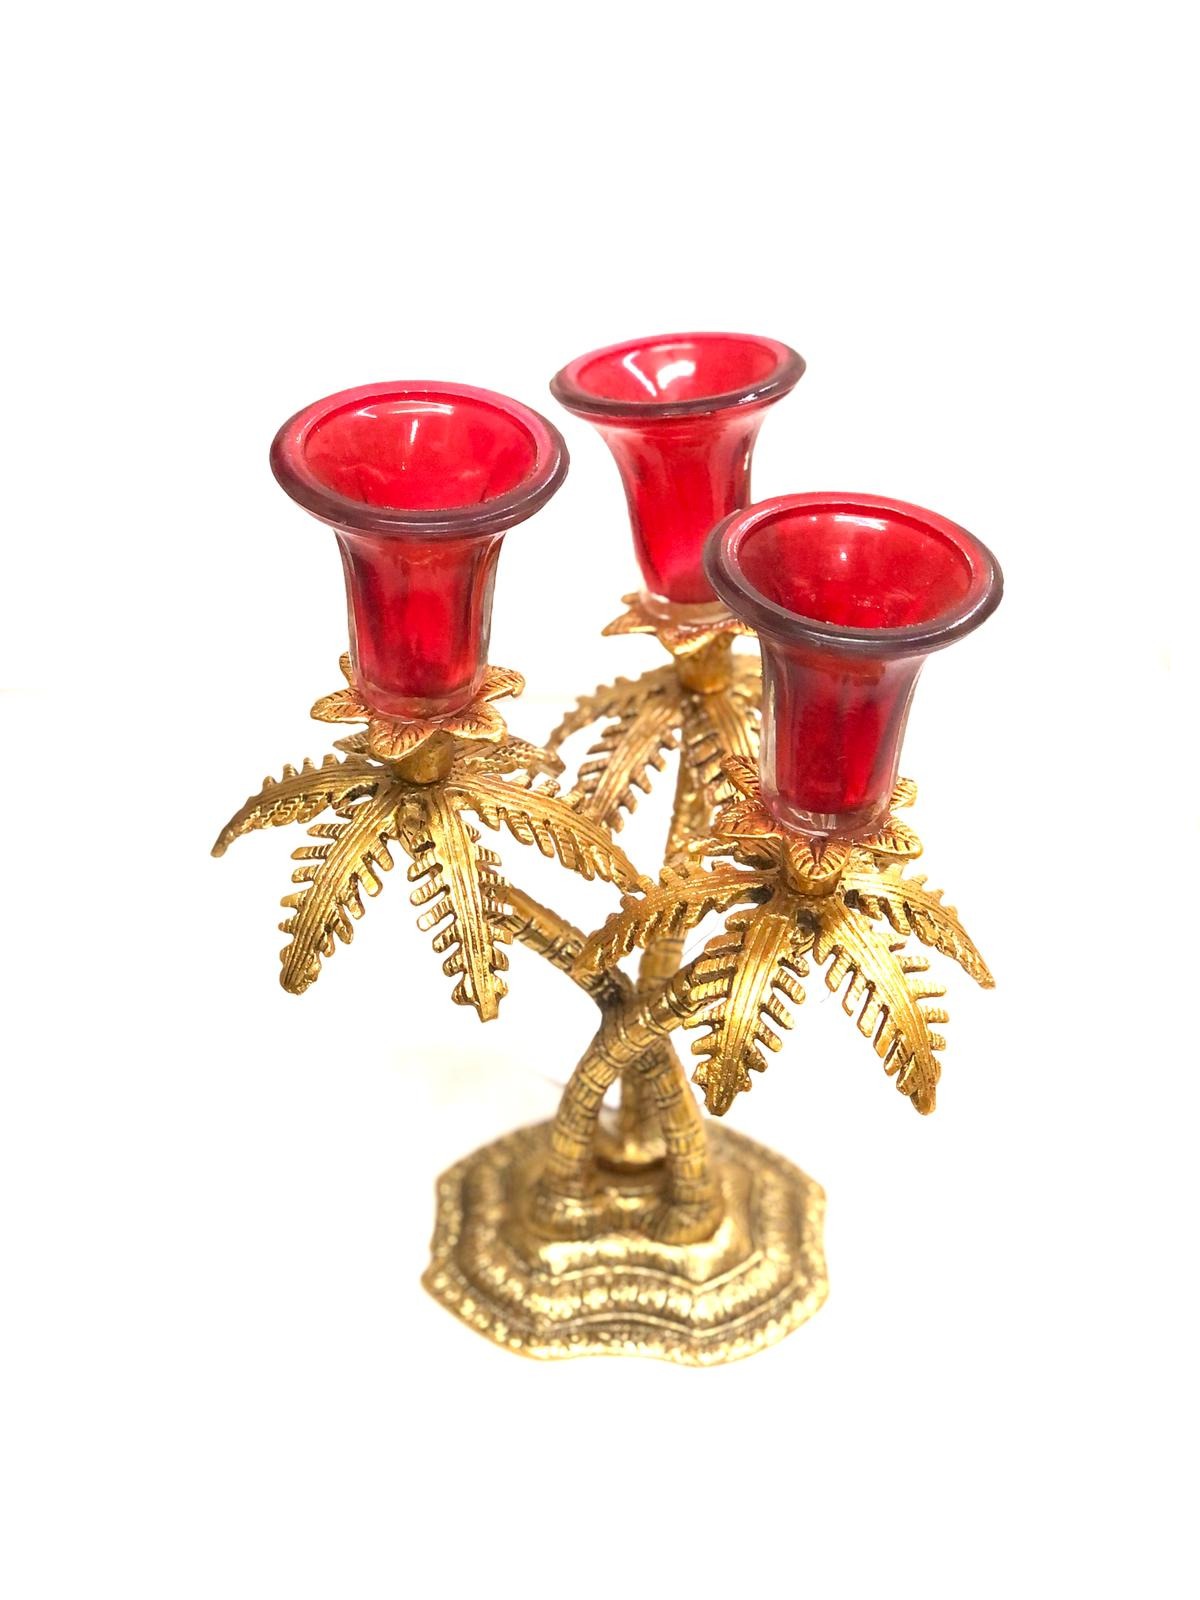 Tree Style Candle Holder With Glass Nature Inspired Metal Art By Tamrapatra